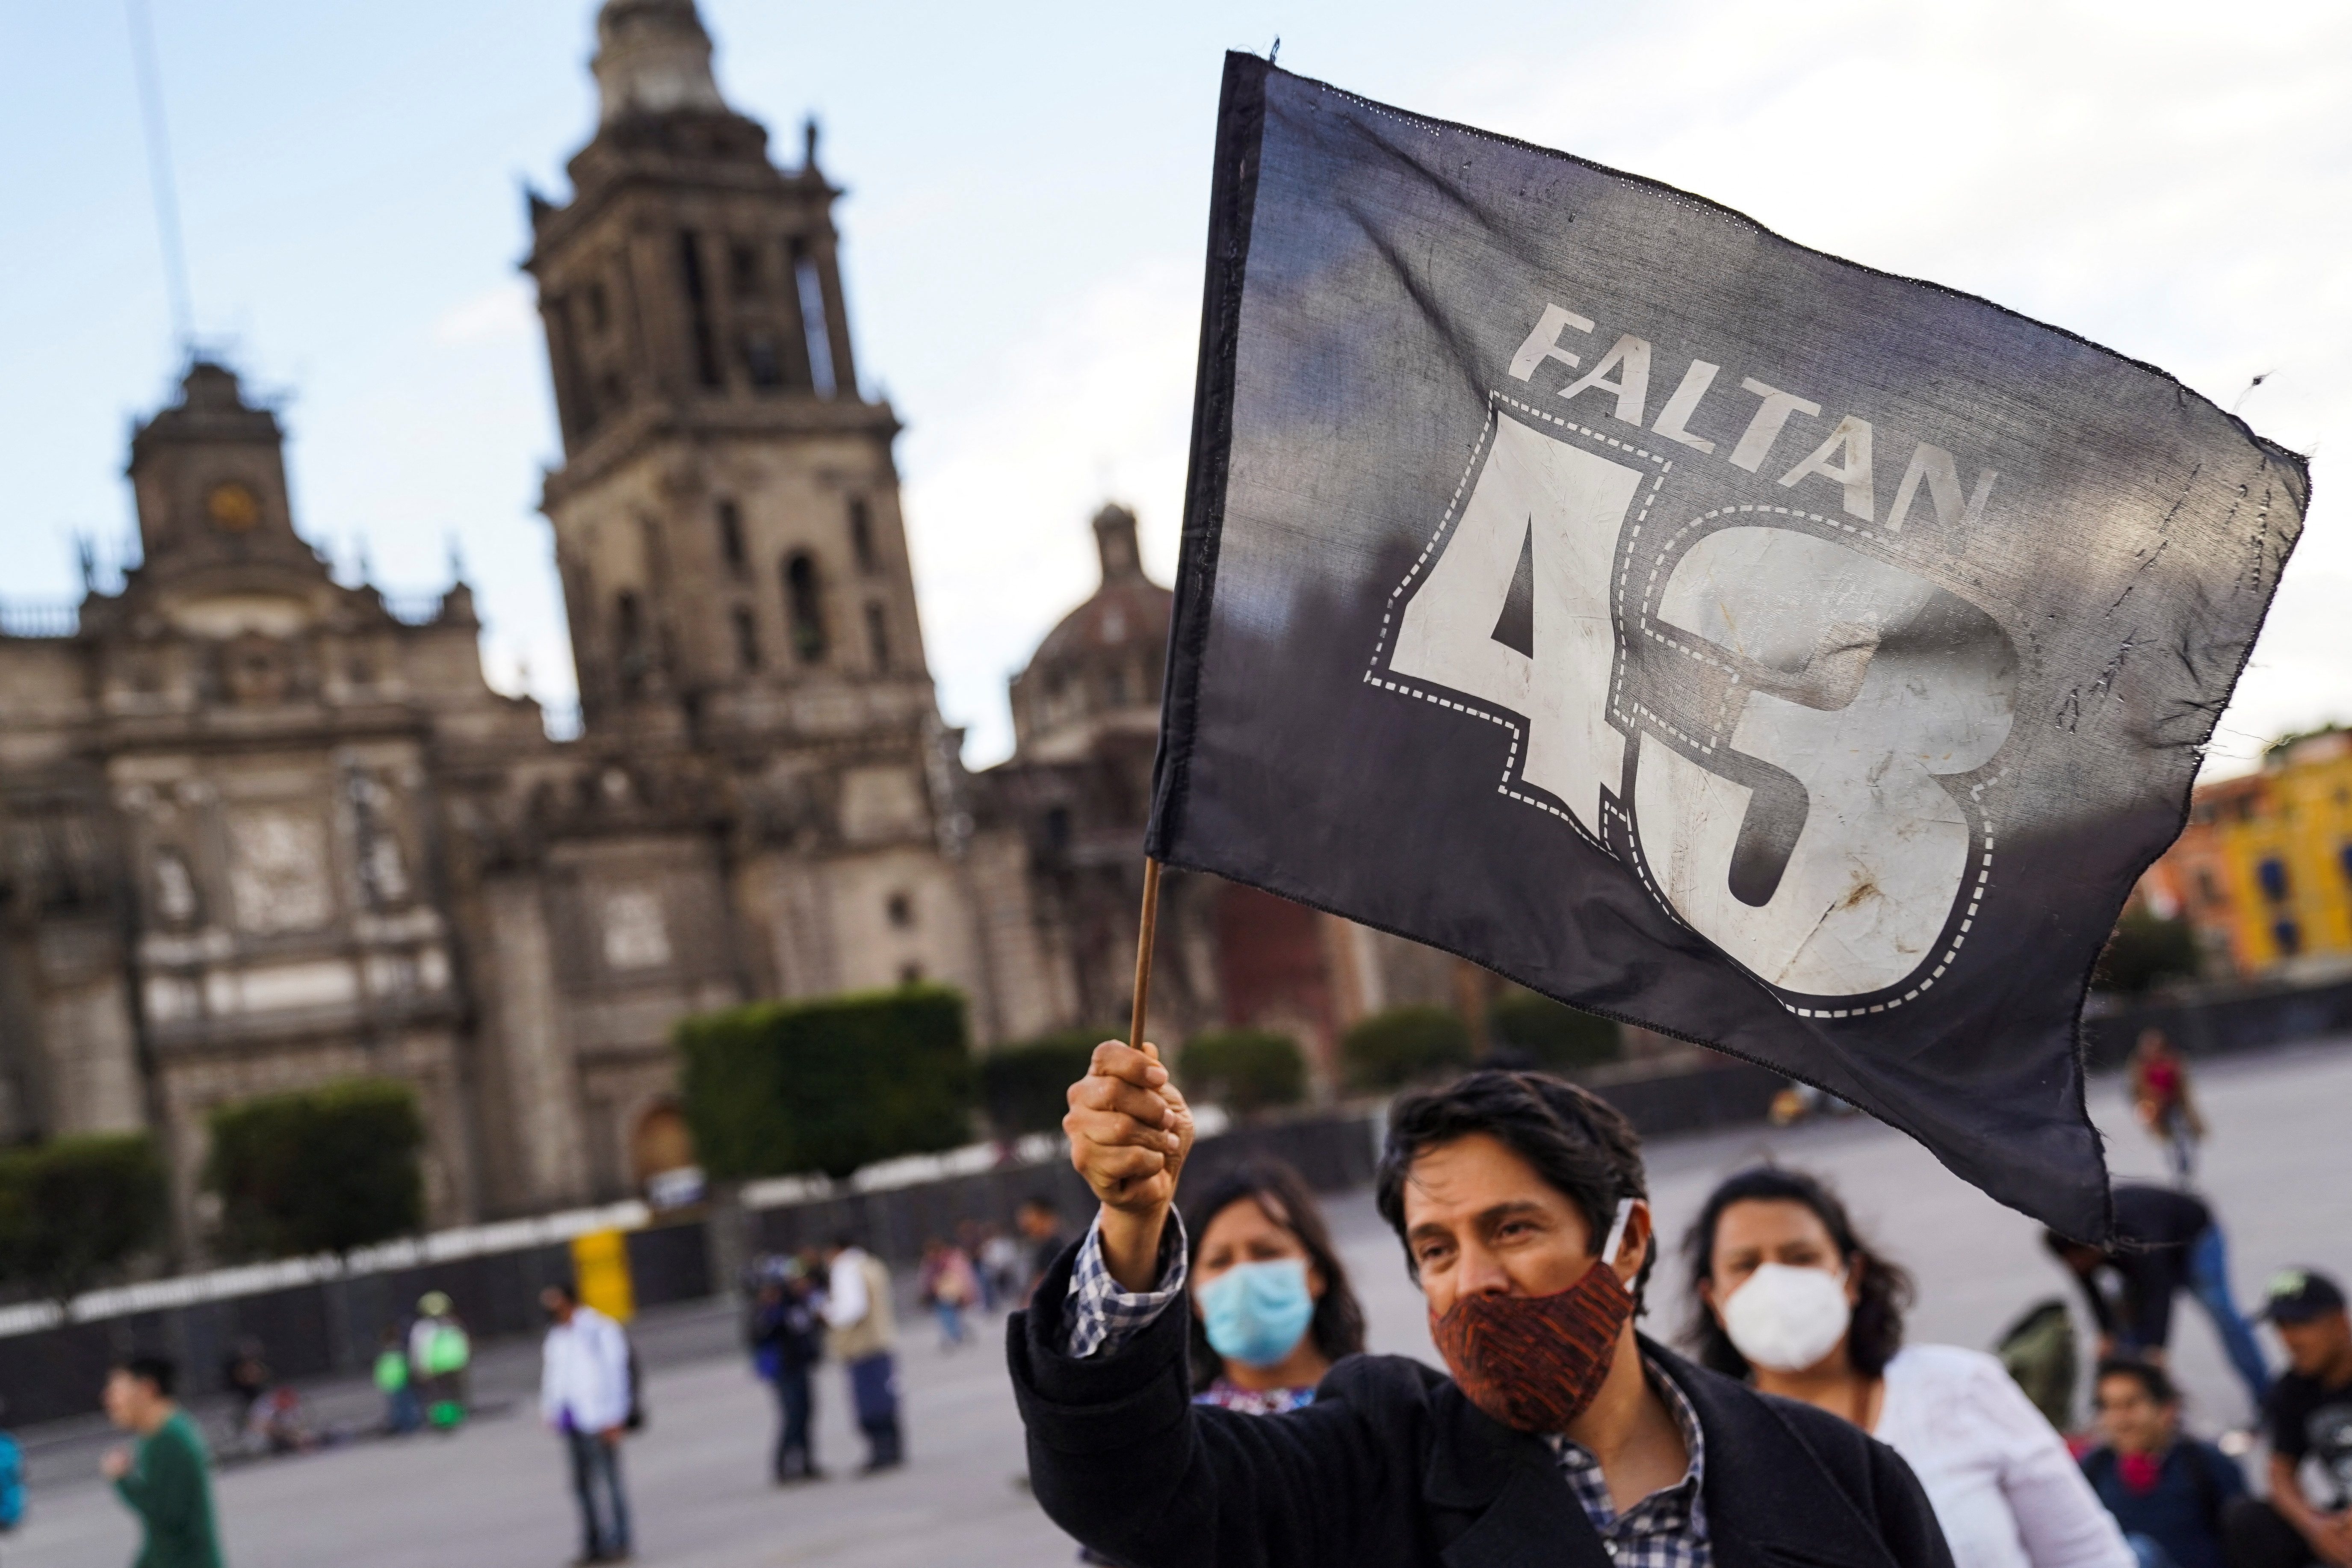 A man waves a flag reading "43 are missing" during a march to mark the 8th anniversary since the disappearance of the 43 students of the Ayotzinapa College "Raul Isidro Burgos" in the state of Guerrero, in Mexico City, Mexico, September 26, 2022. REUTERS/Toya Sarno Jordan